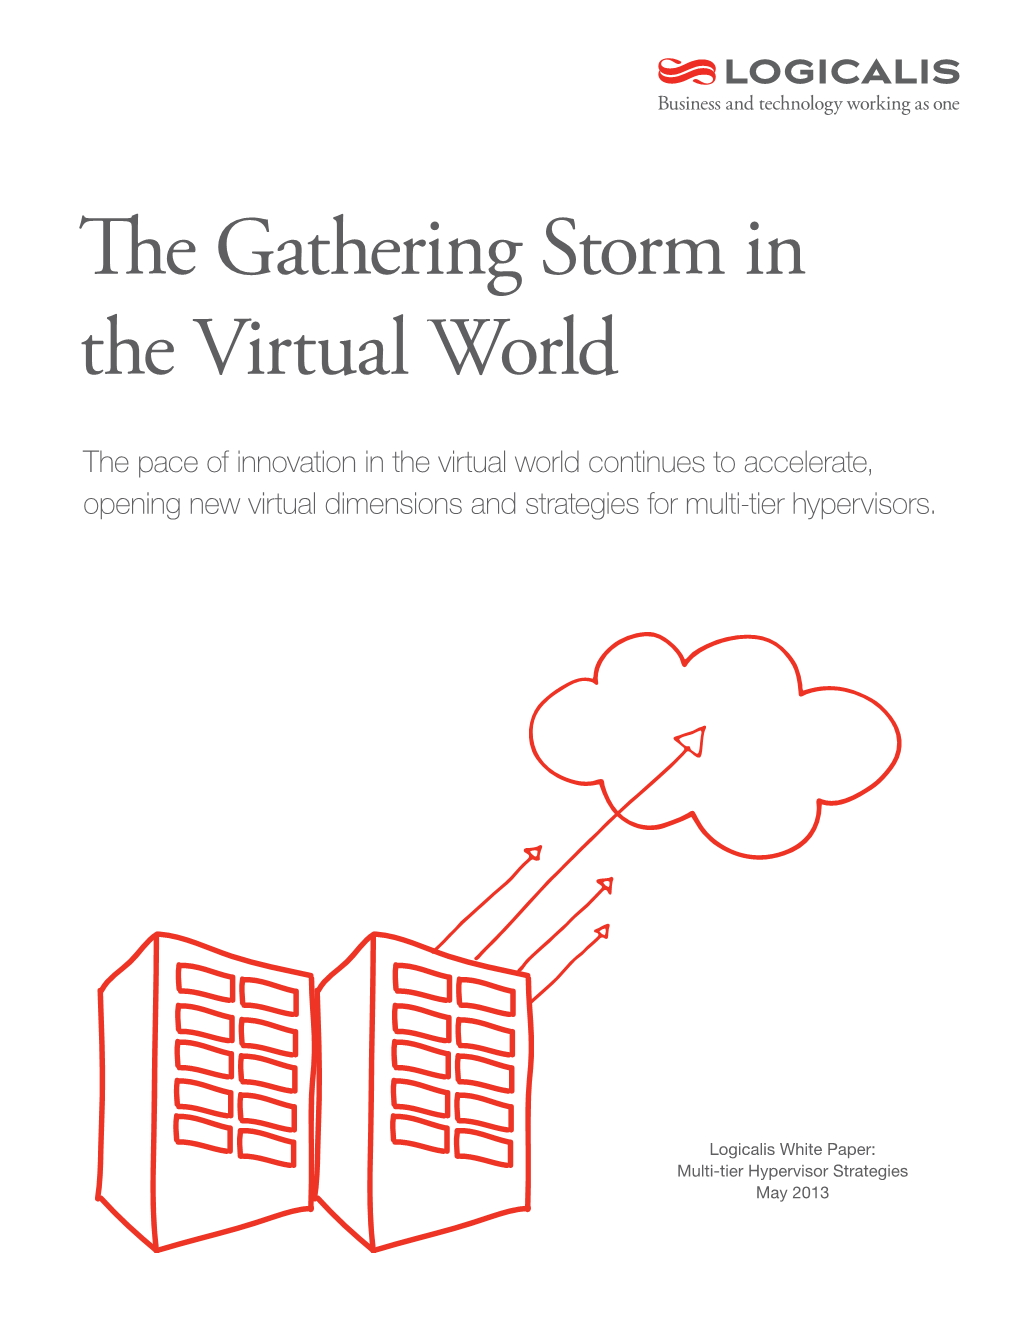 The Gathering Storm in the Virtual World